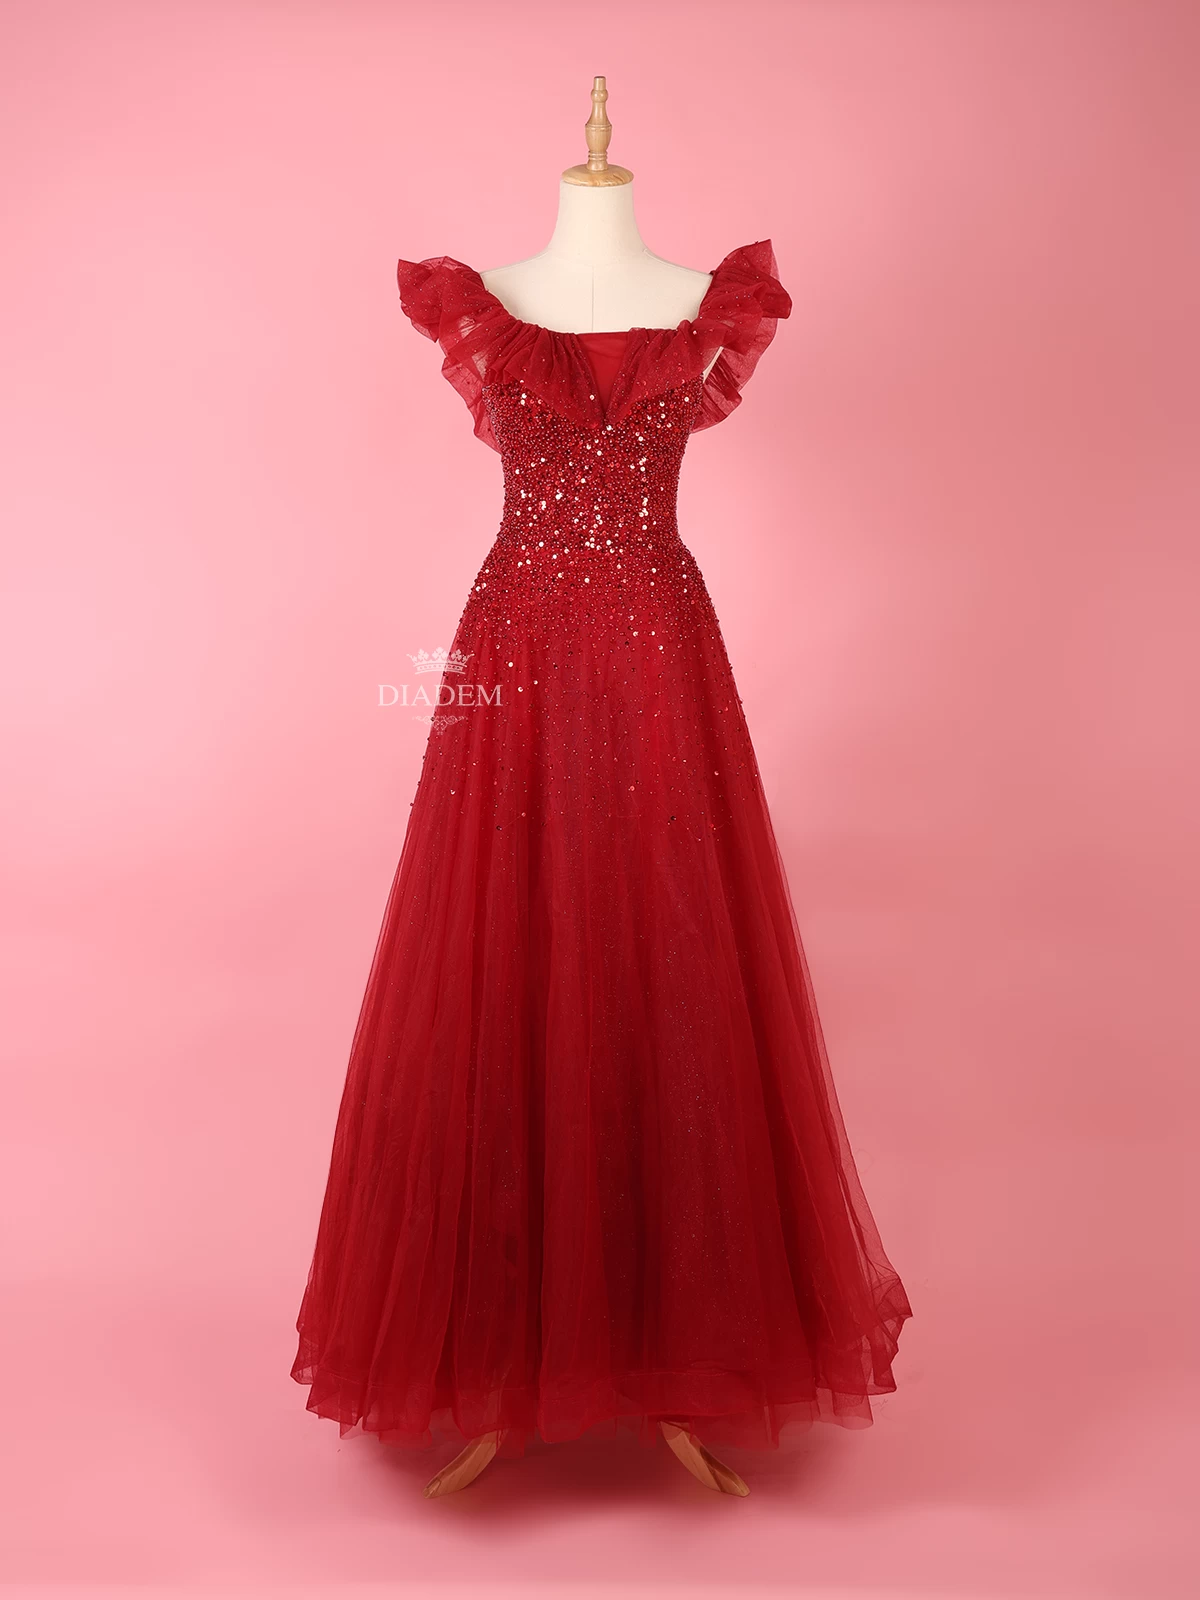 Party Gowns at Best Price in Chennai, Tamil Nadu | The Fair Lady Designer (  Diadem )